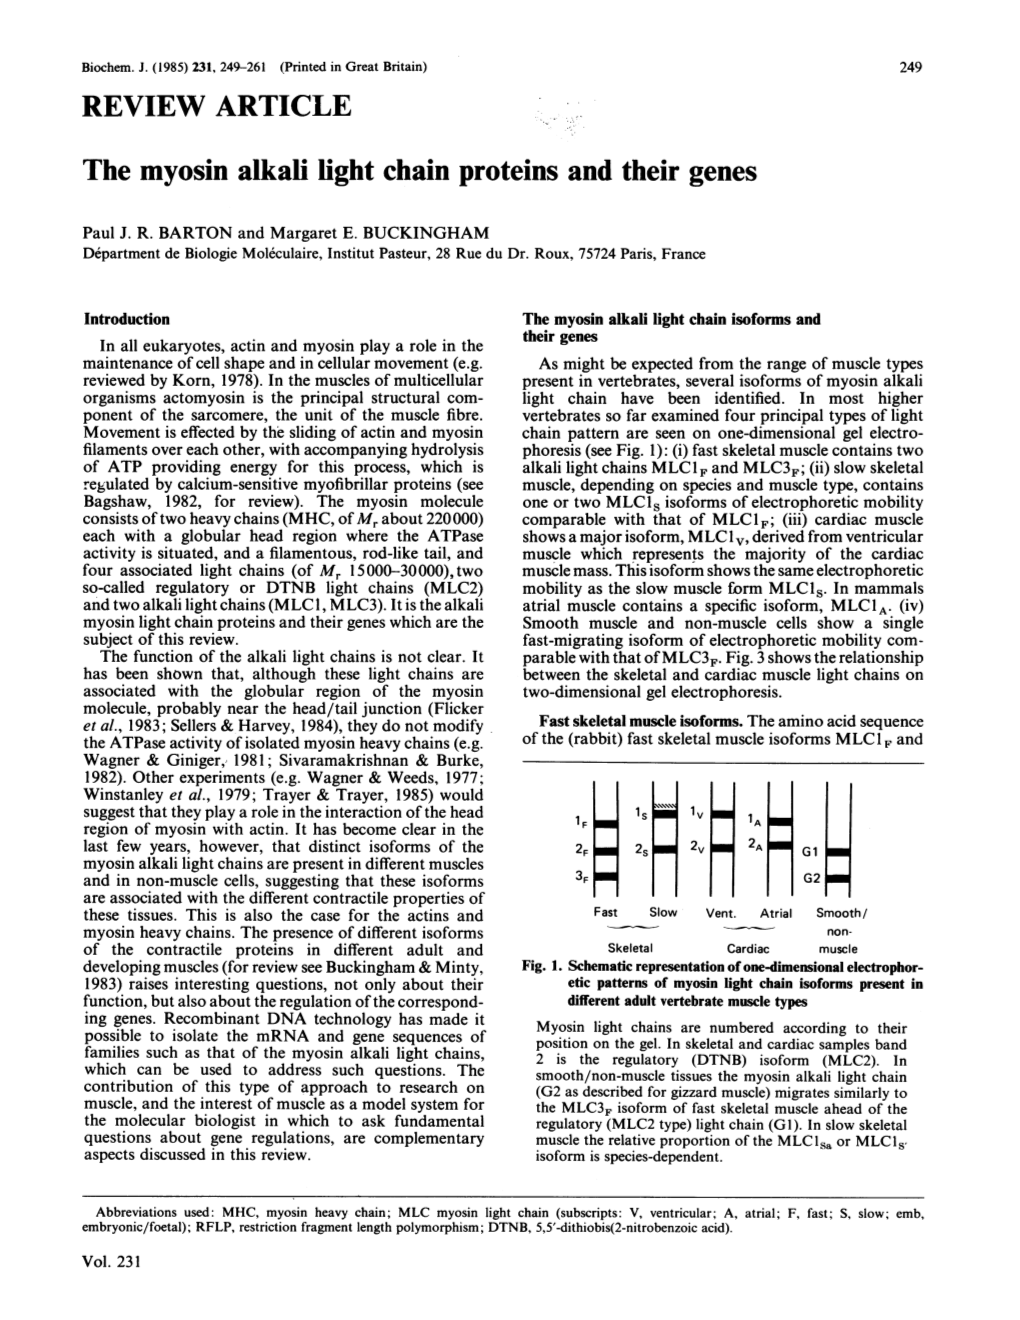 The Myosin Alkali Light Chain Proteins and Their Genes